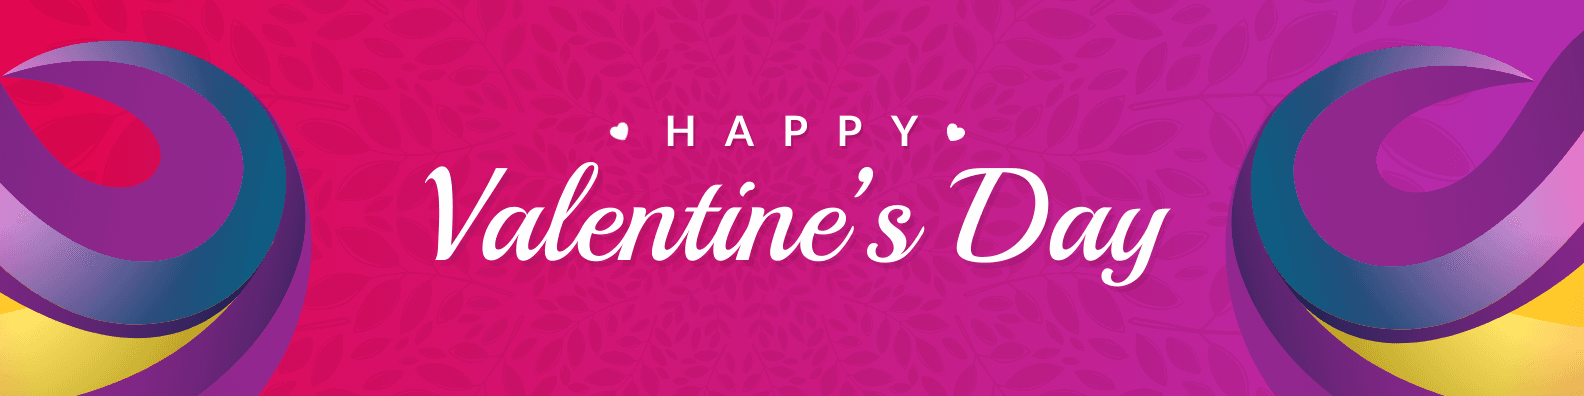 pink-background-happy-valentines-day-linkedin-banner-template-thumbnail-img